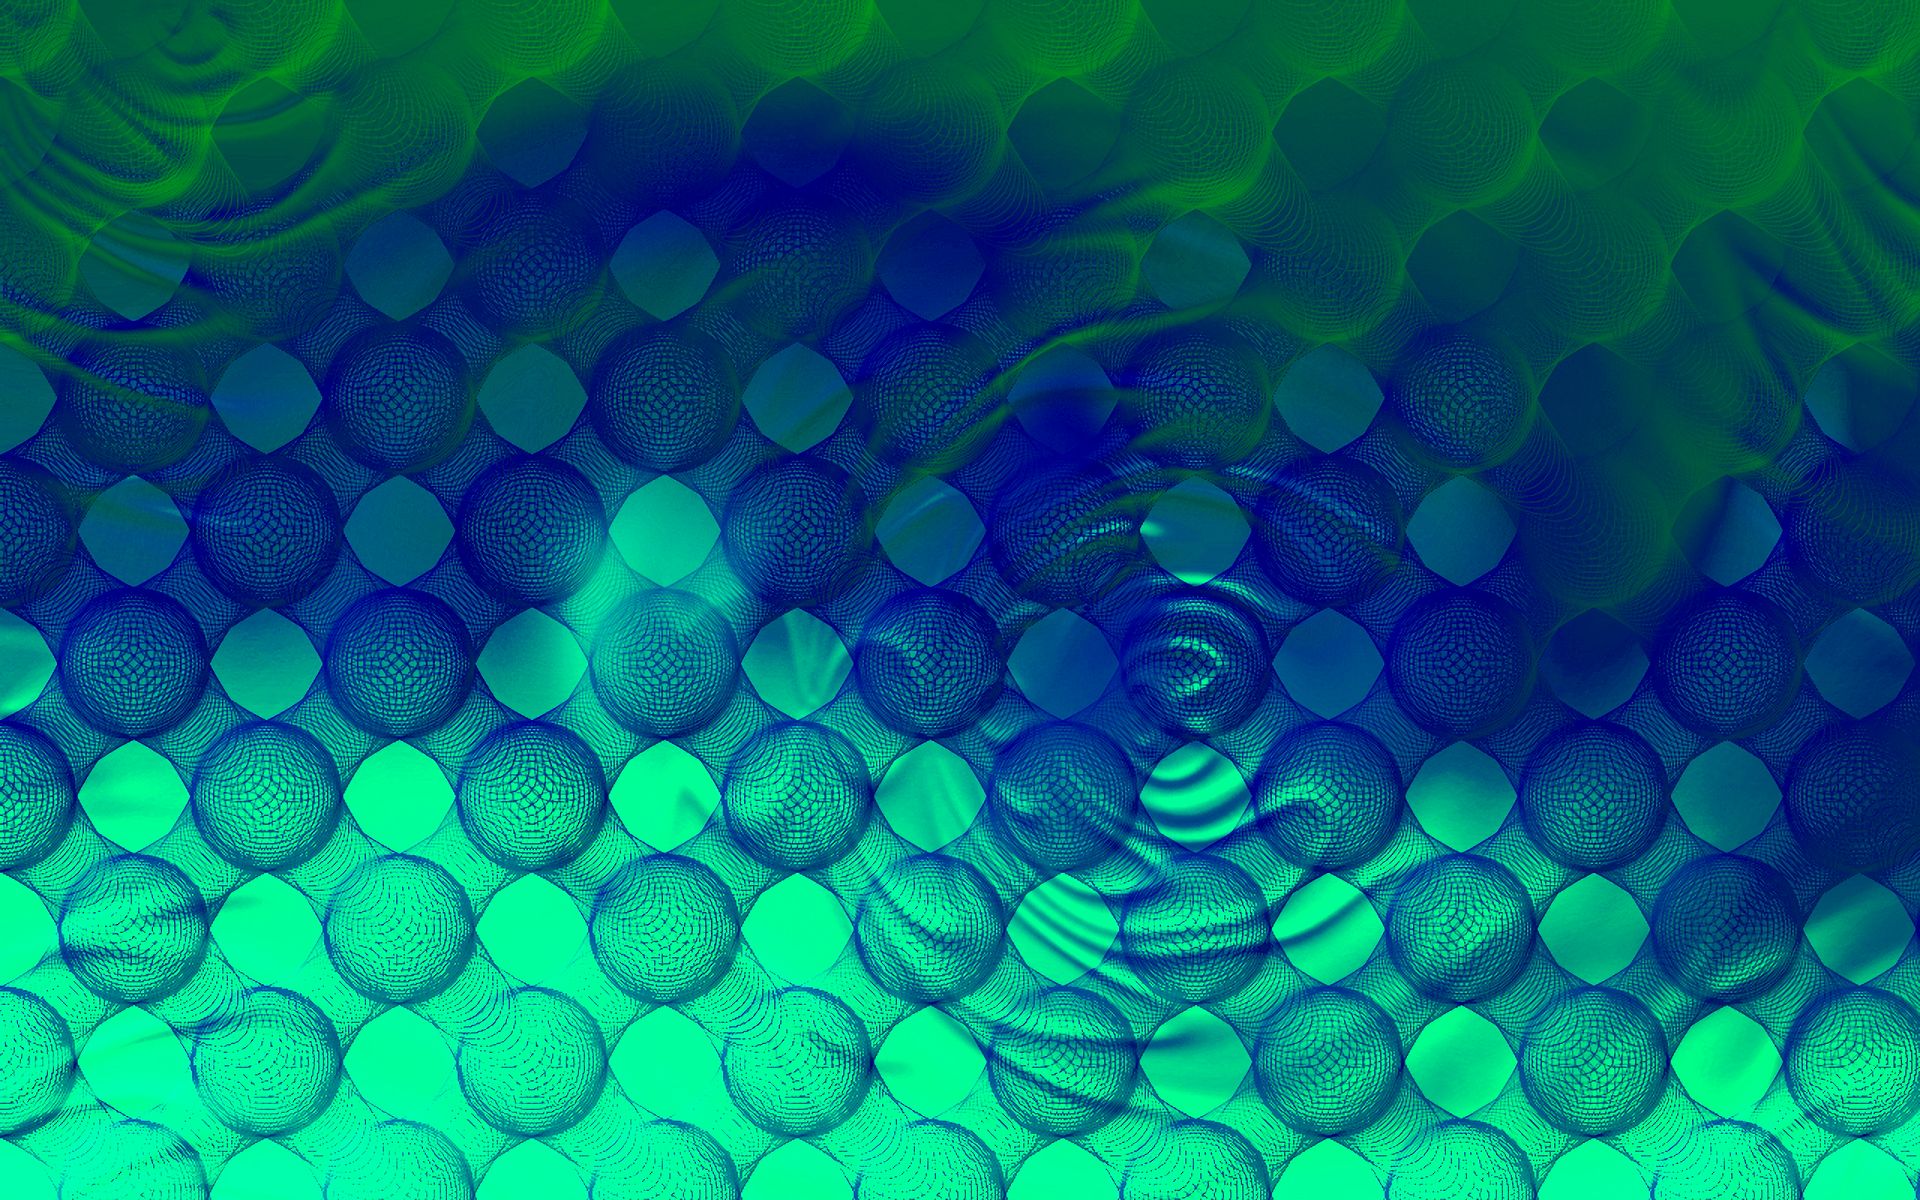 abstract, pattern, blue, circle, green, octagon, ripple, water iphone wallpaper